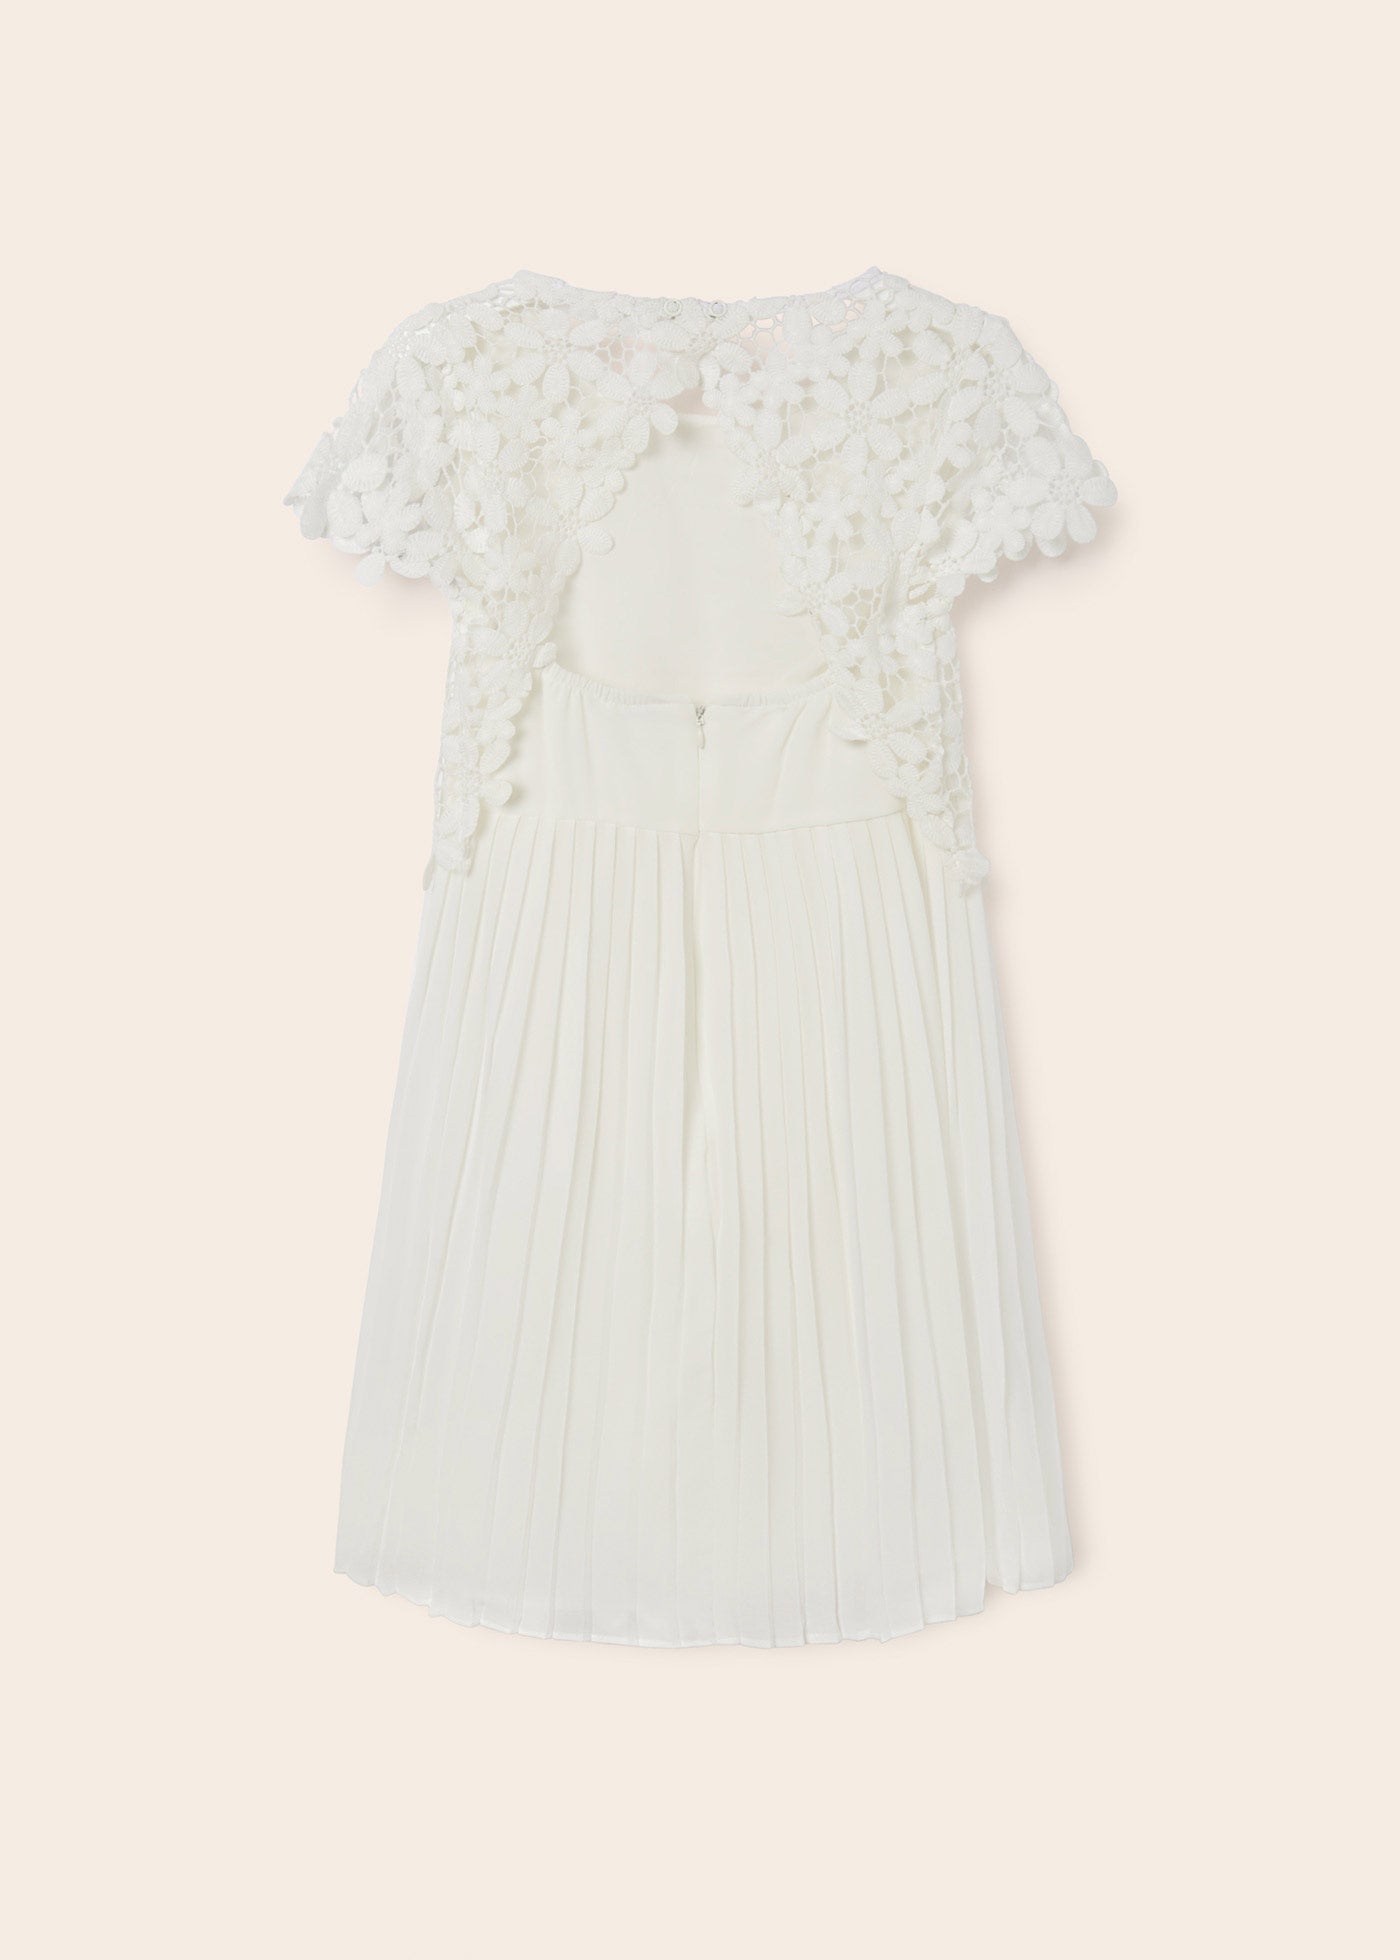 Mayoral Junior S/S Dress w/Lace Overlay & Pleated Skirt _Off White 6916-078